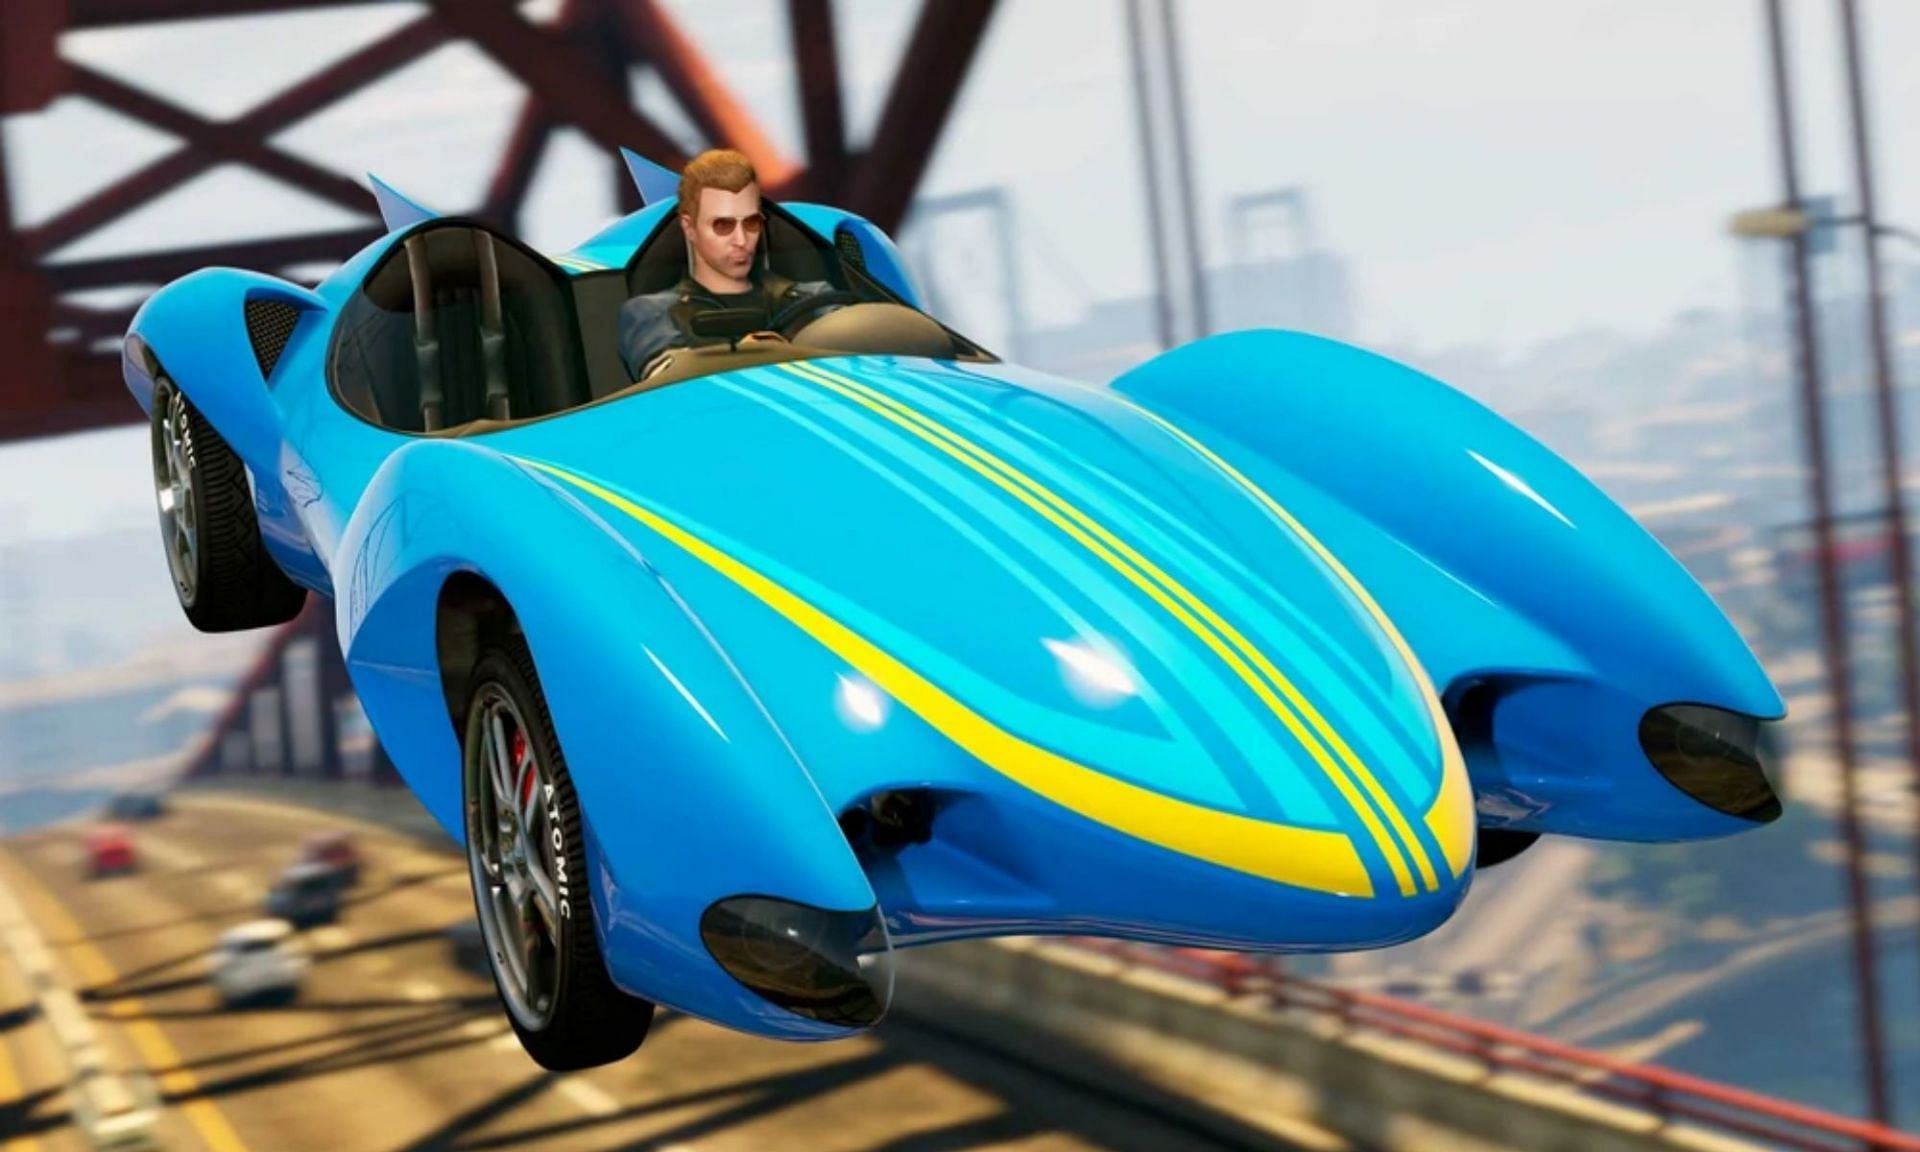 This retro speedster is now on sale (Image via Rockstar Games)